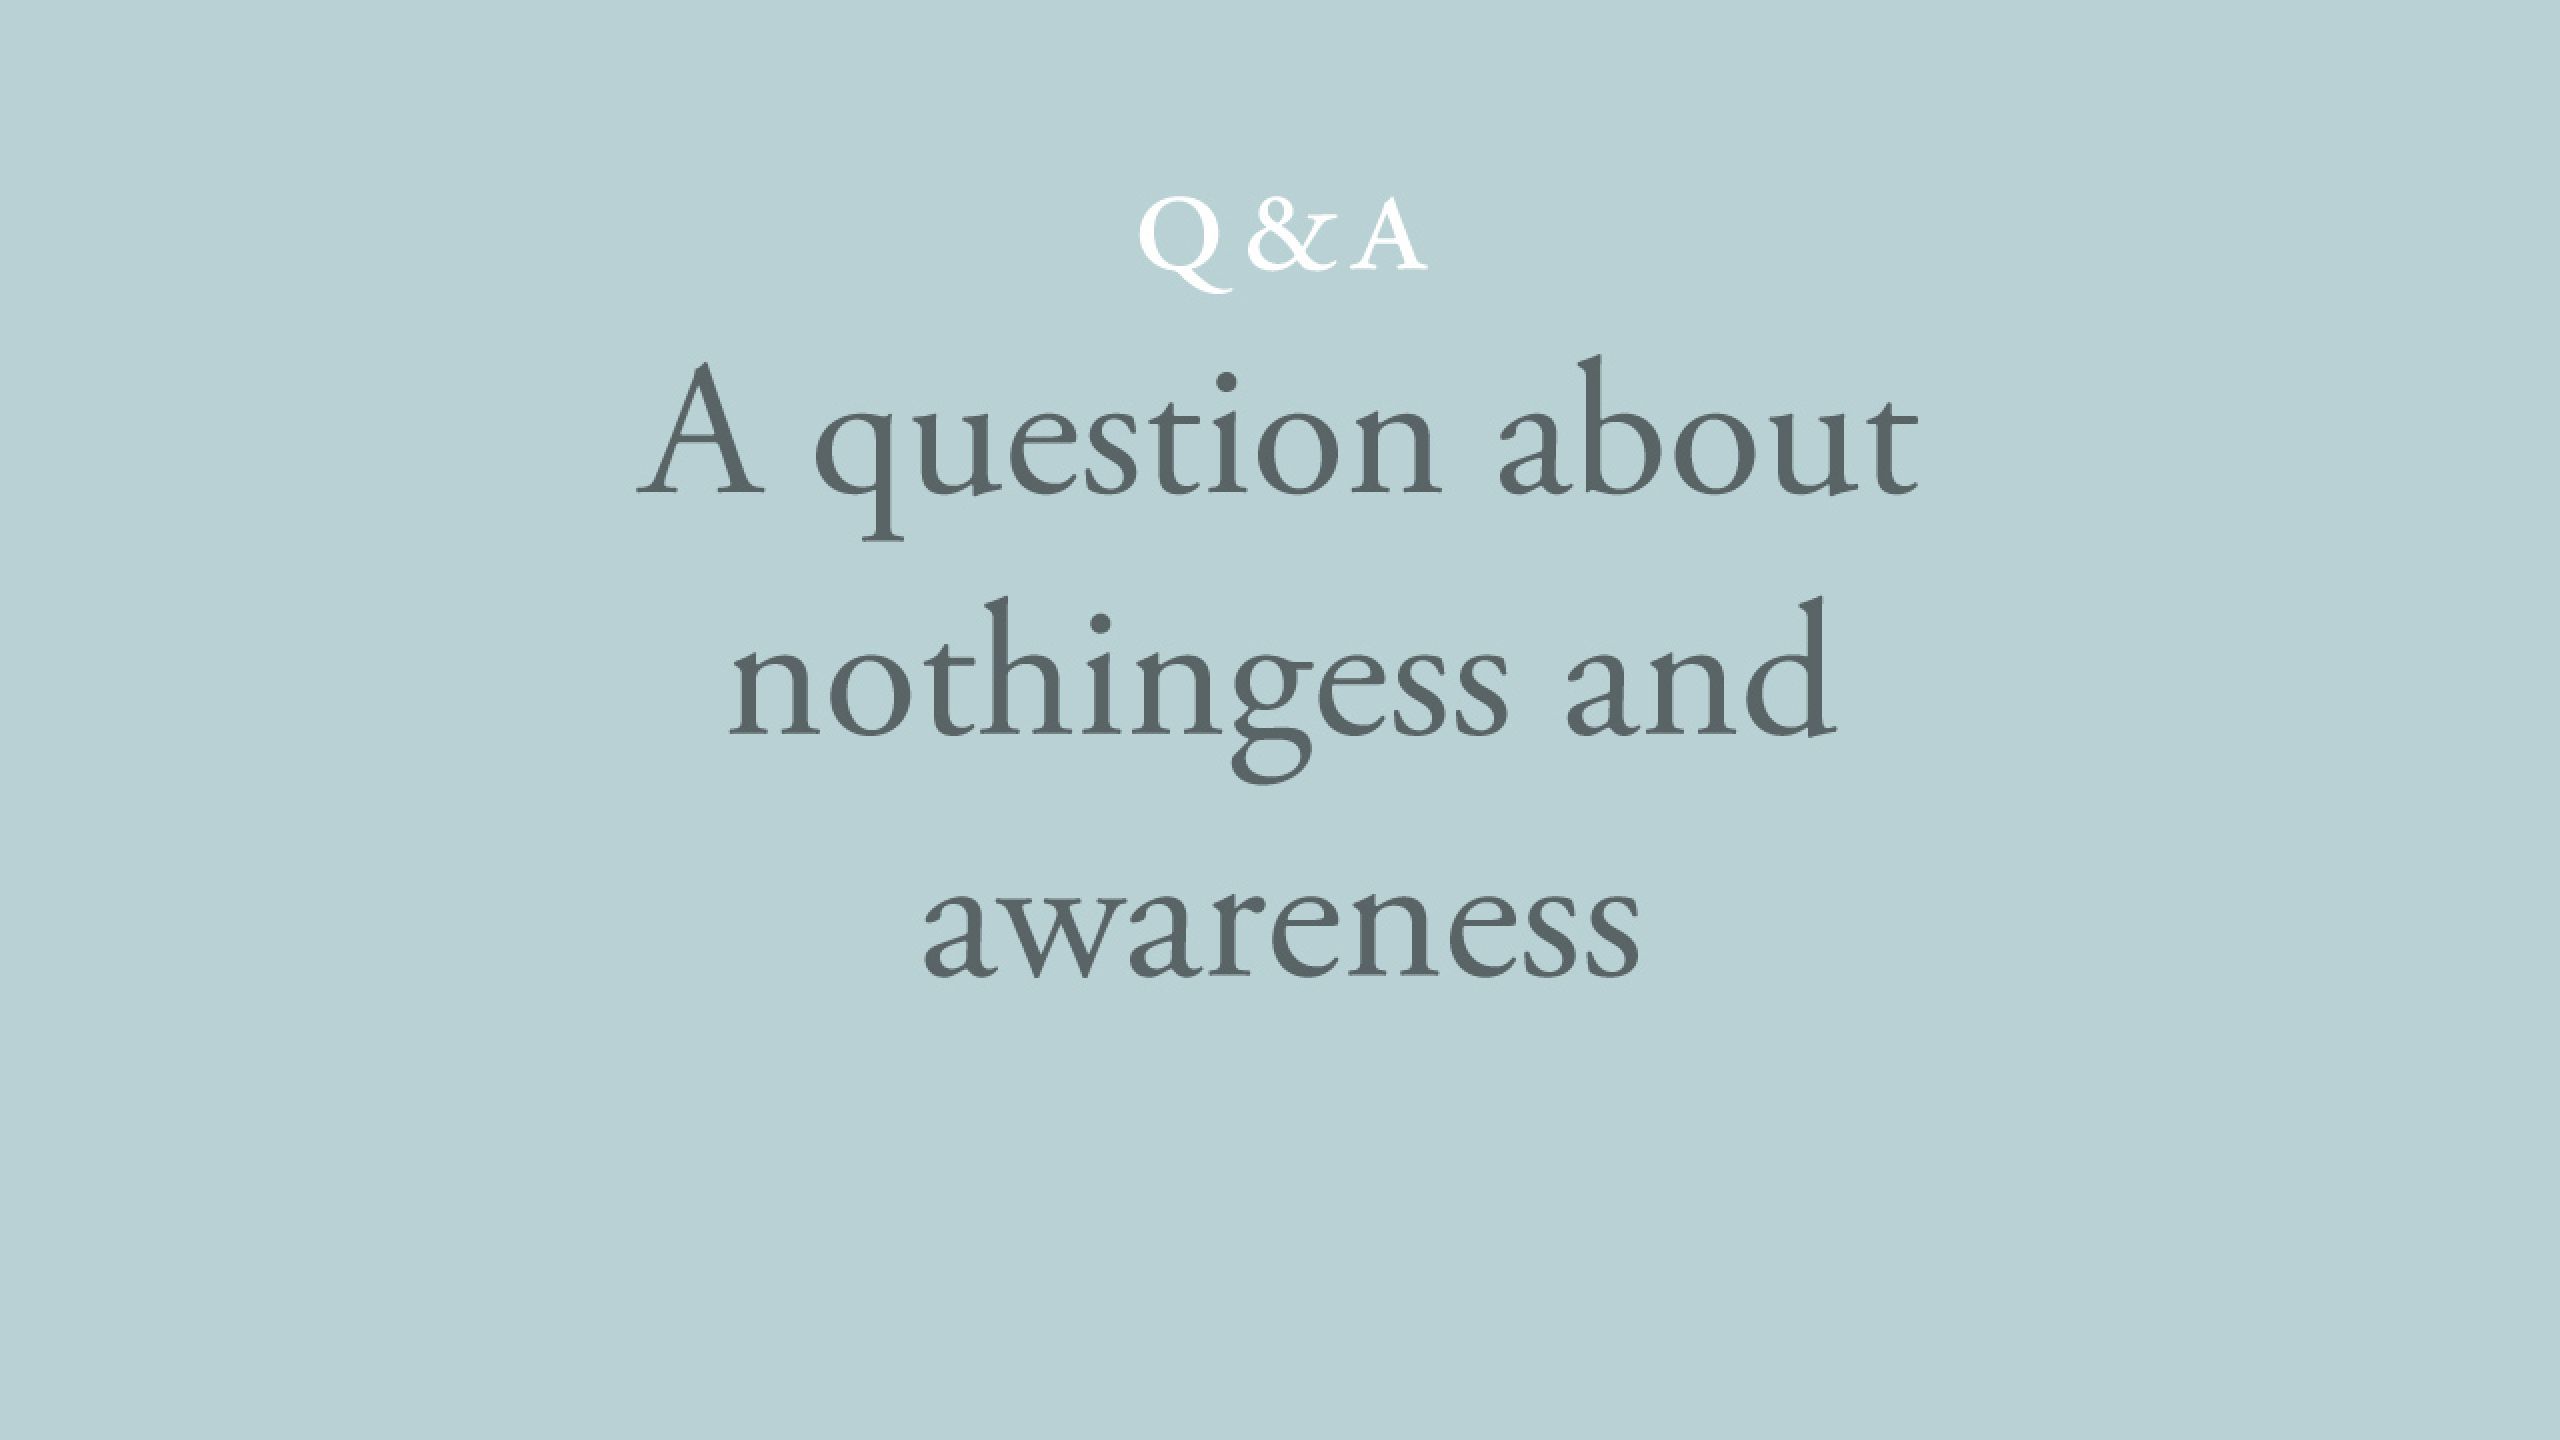 Are awareness and nothingness the same thing?